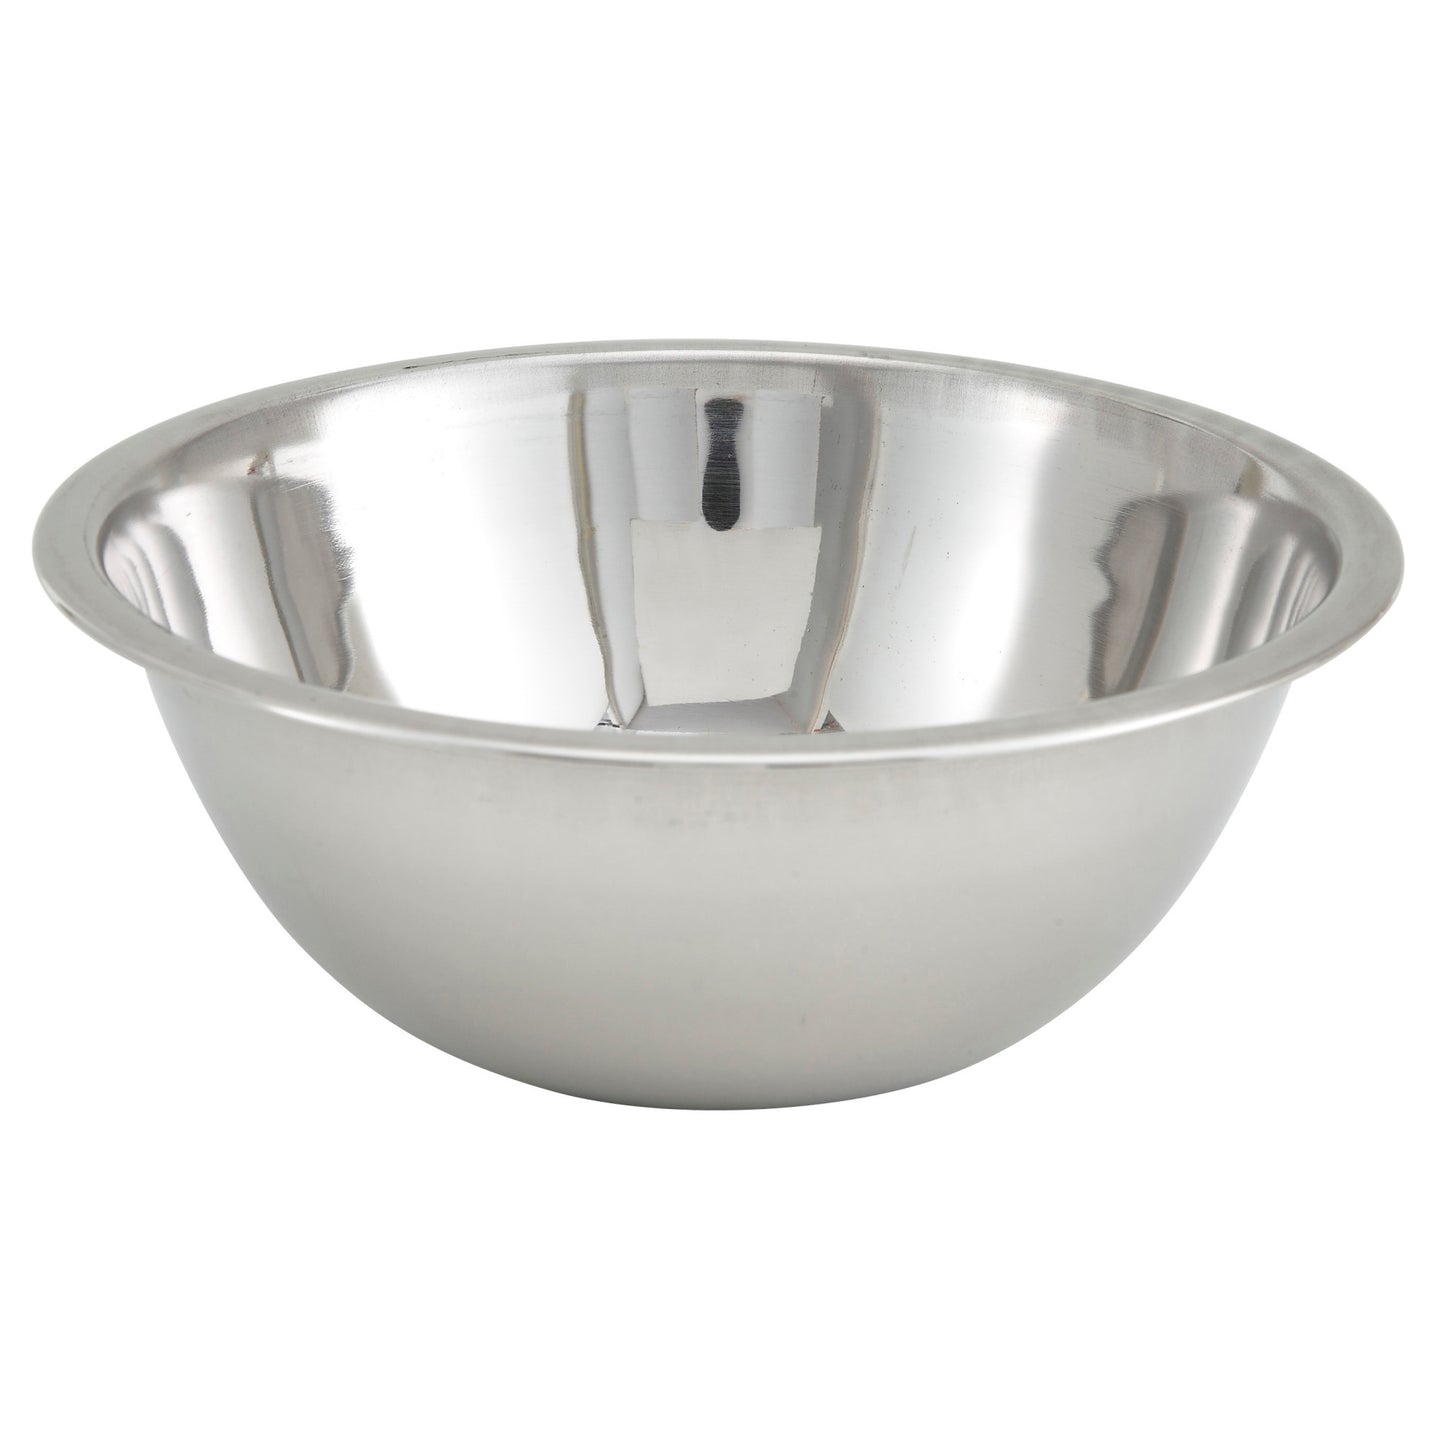 MXBT-300Q - All-Purpose True Capacity Mixing Bowl, Stainless Steel - 3 Quart